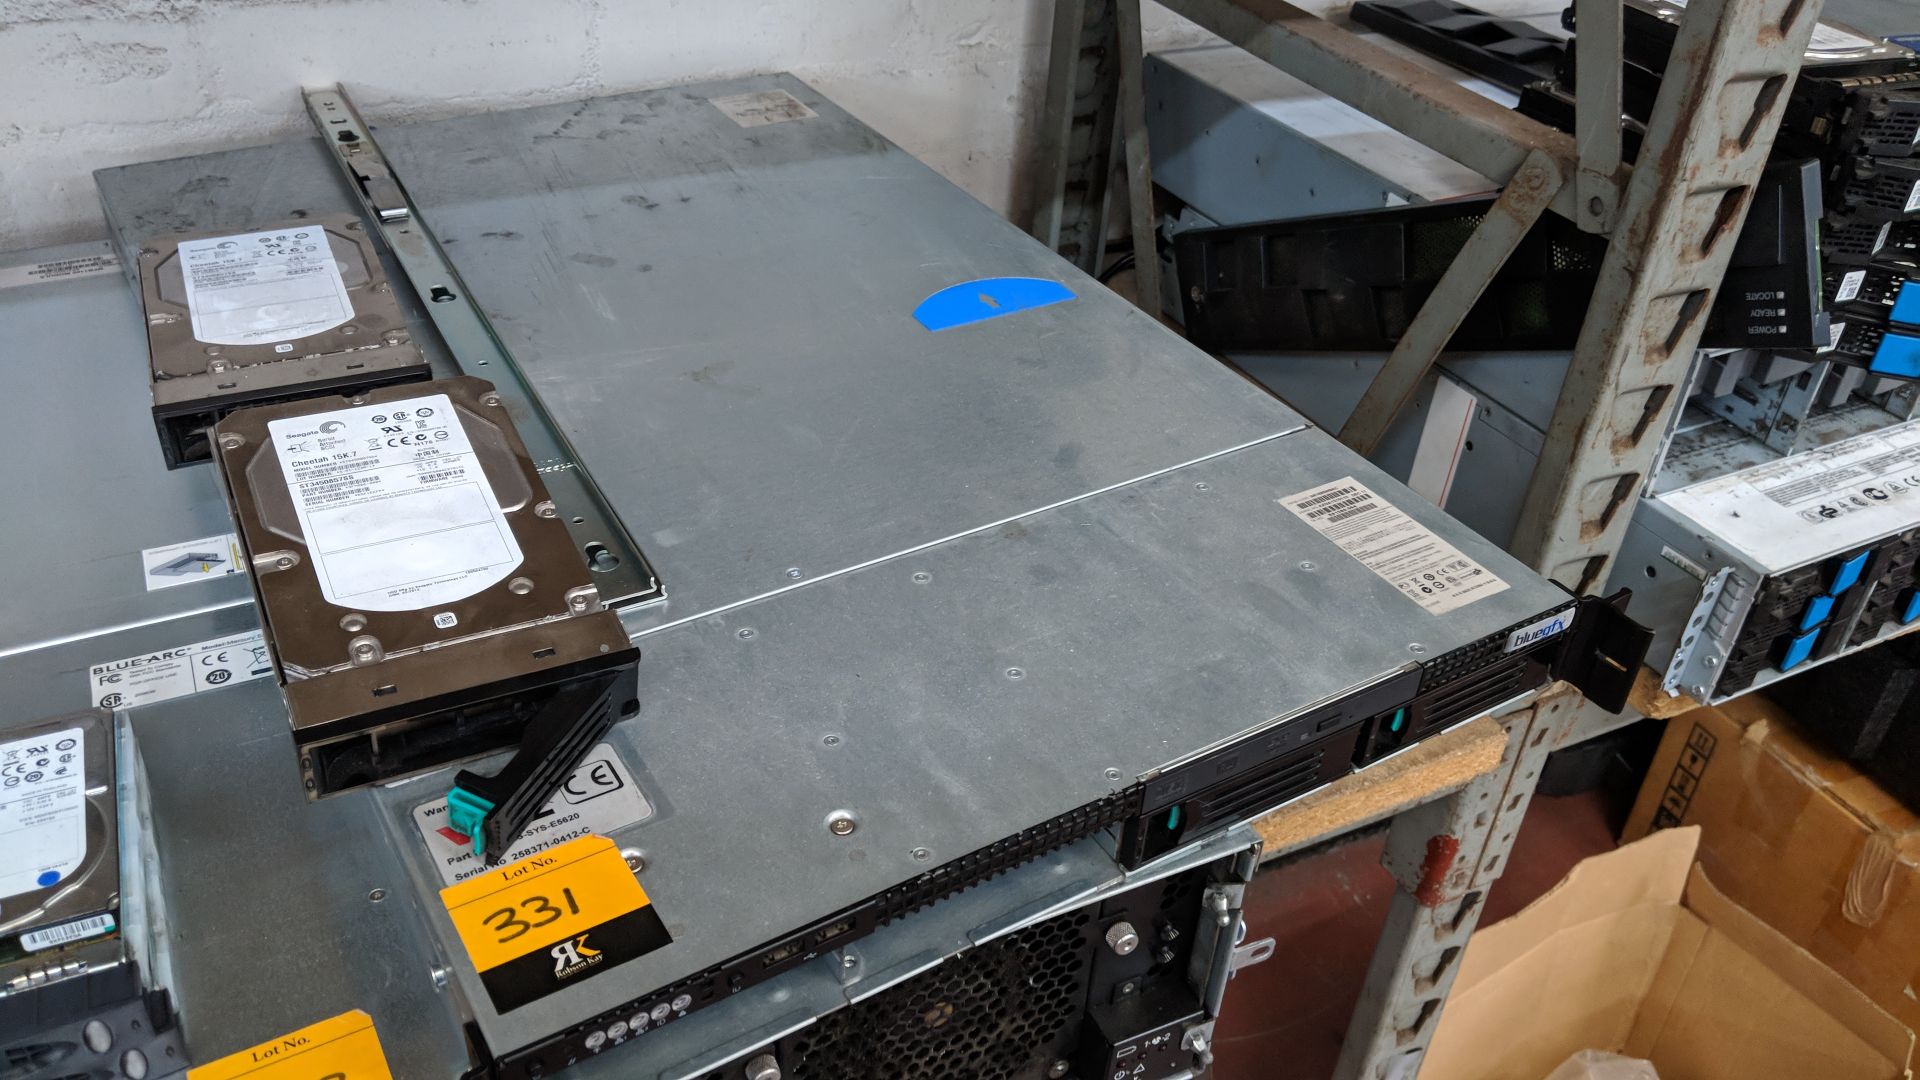 Blue FX rack mountable server with 2 off Seagate Cheetah 15K.7 450Gb hard drives IMPORTANT: Please